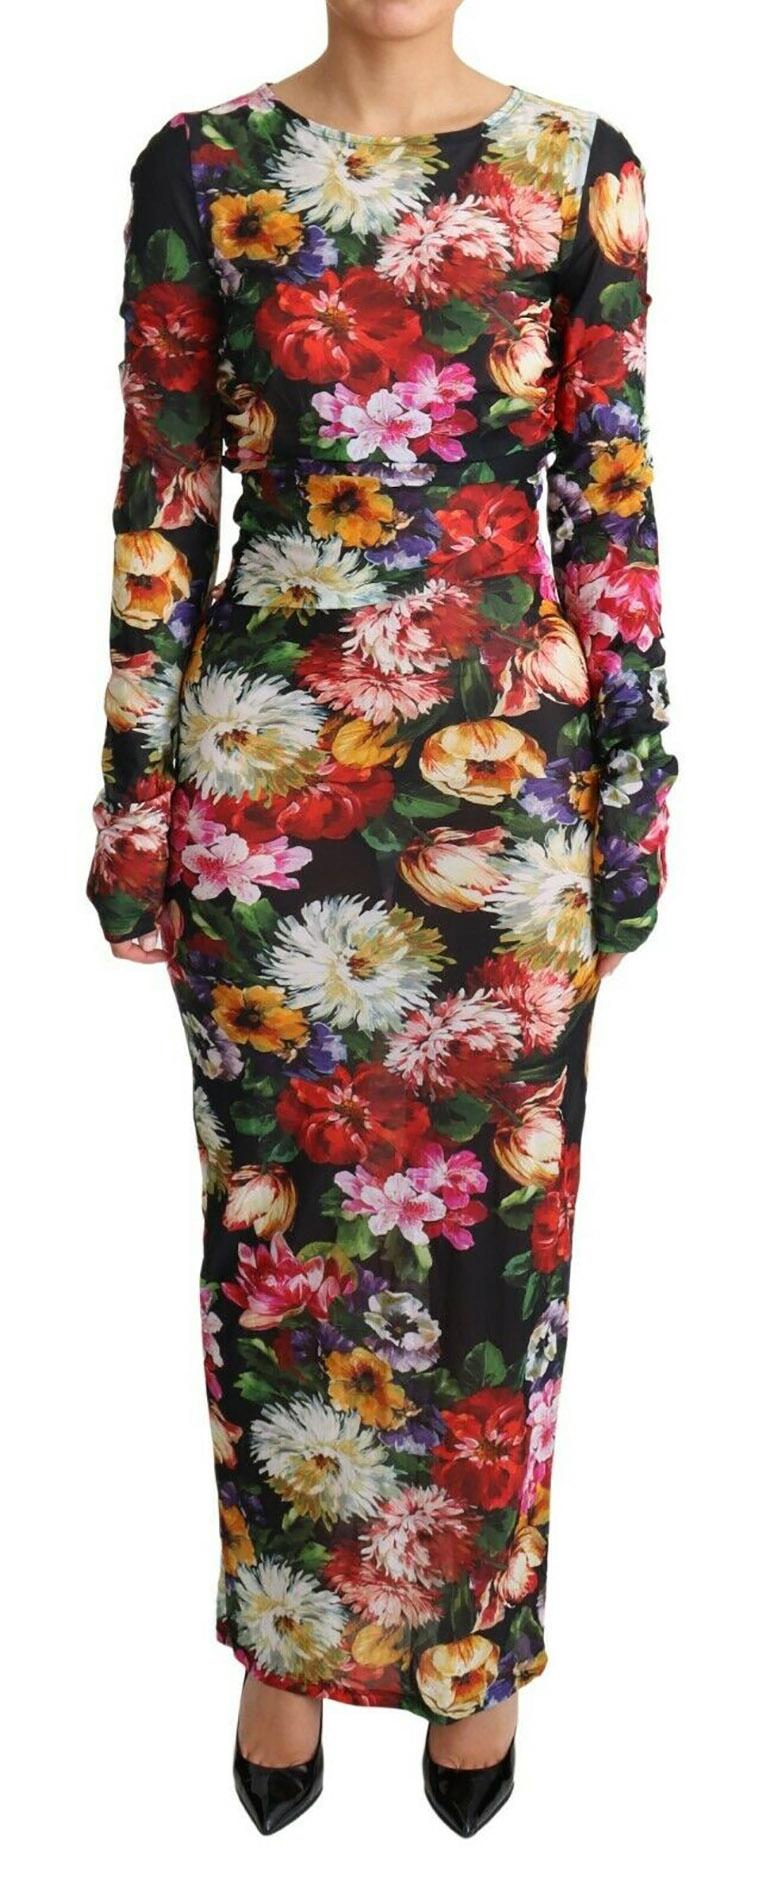 Gorgeous brand new with tags, 100% Authentic Dolce & Gabbana Colorful sheer dress. Decorated with a printed floral motif features a round neck and long sleeves.



Model: Maxi dress

Color: Black with multicolor floral print

Zipper closure on the